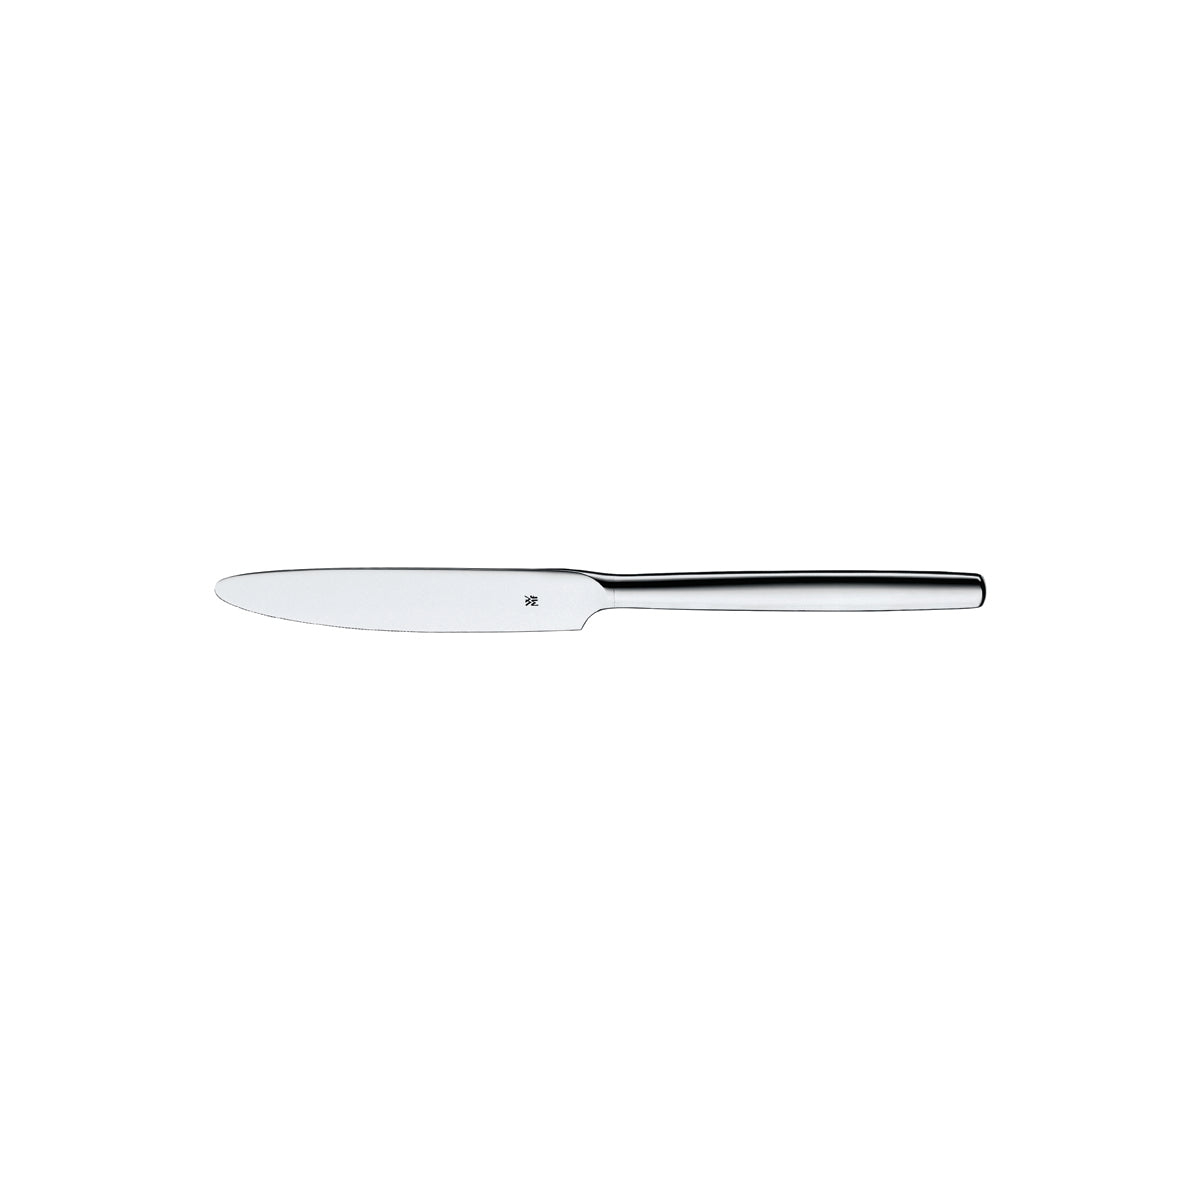 01.0403.6067 WMF Bistro Table Knife - Hollow Handle Silverplated Tomkin Australia Hospitality Supplies